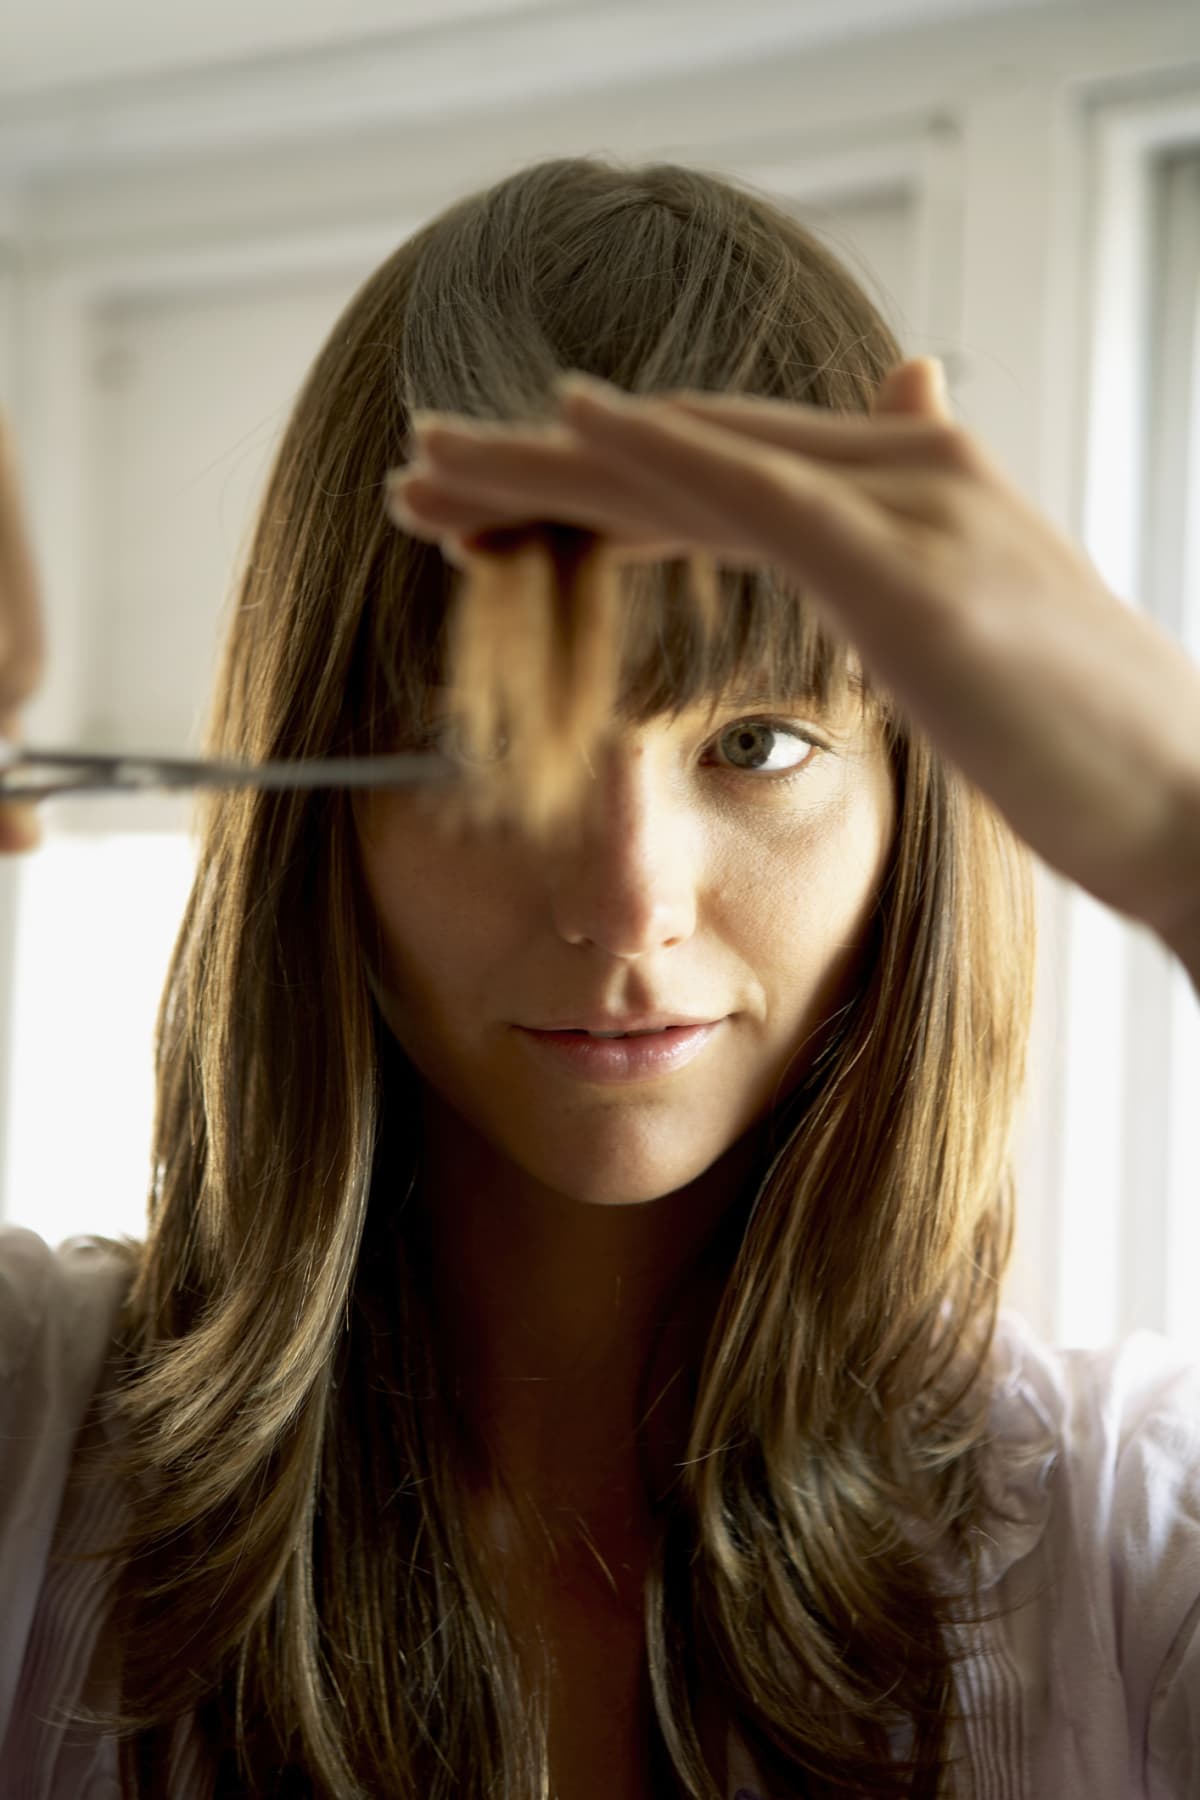 Woman cutting hair with scissors, close-up